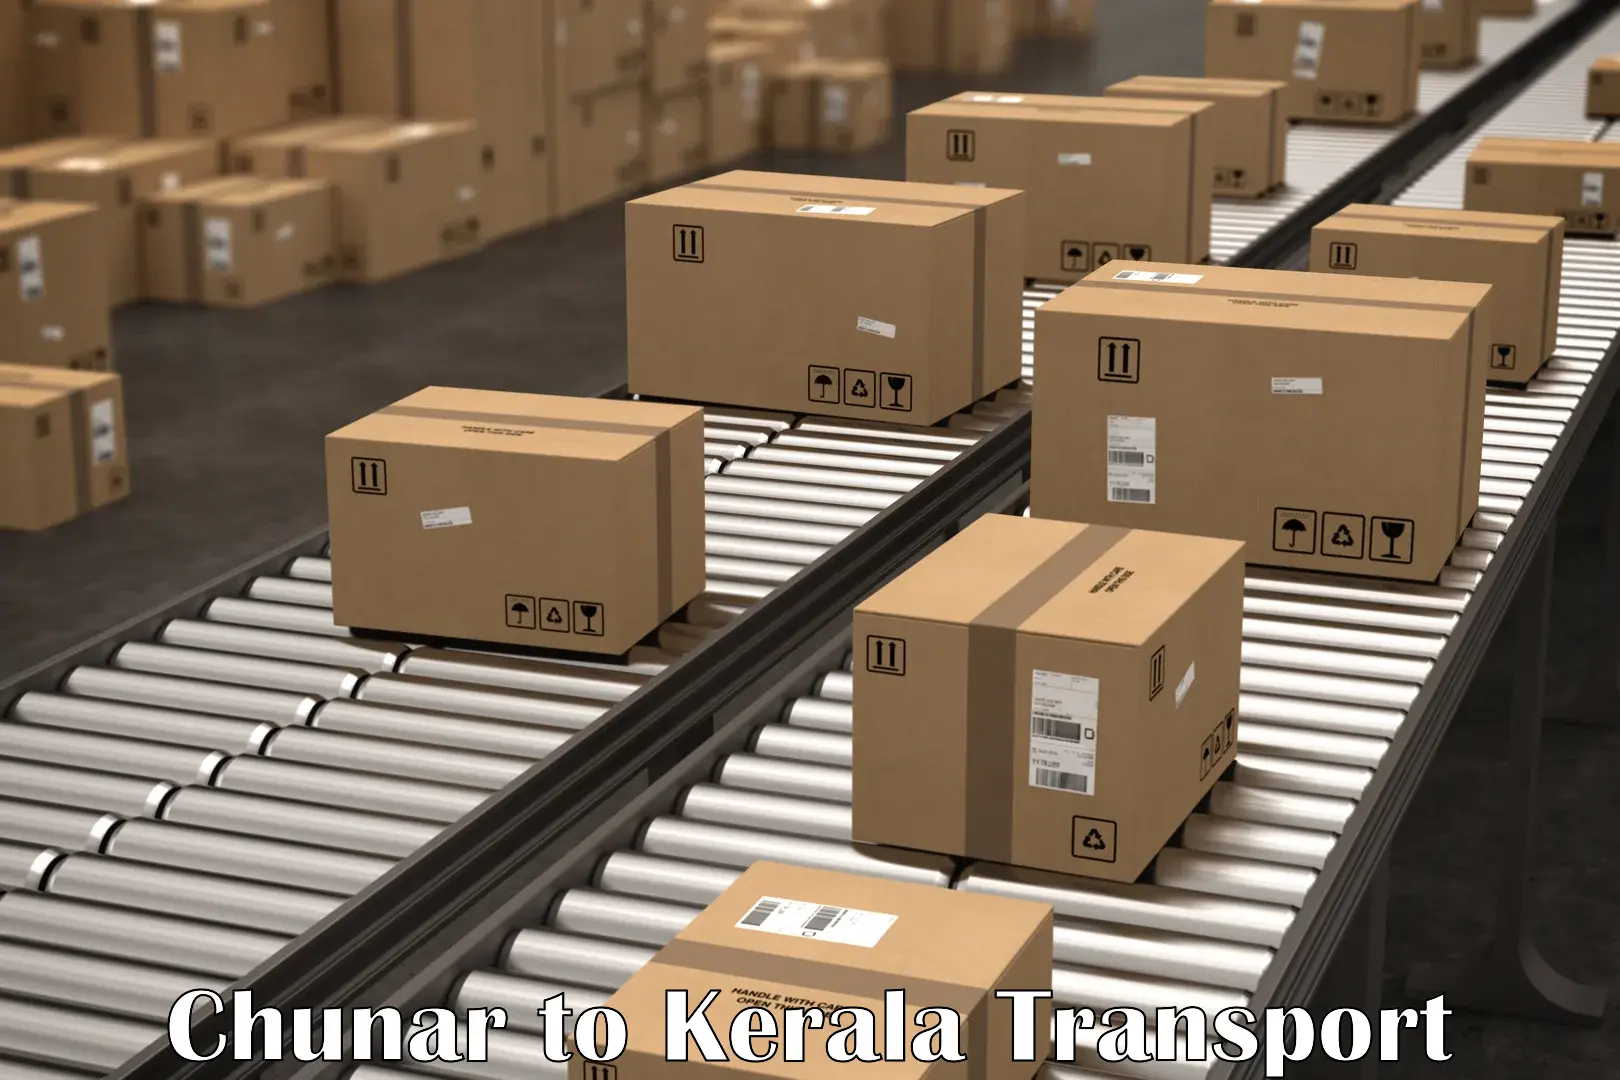 Container transport service Chunar to Munnar